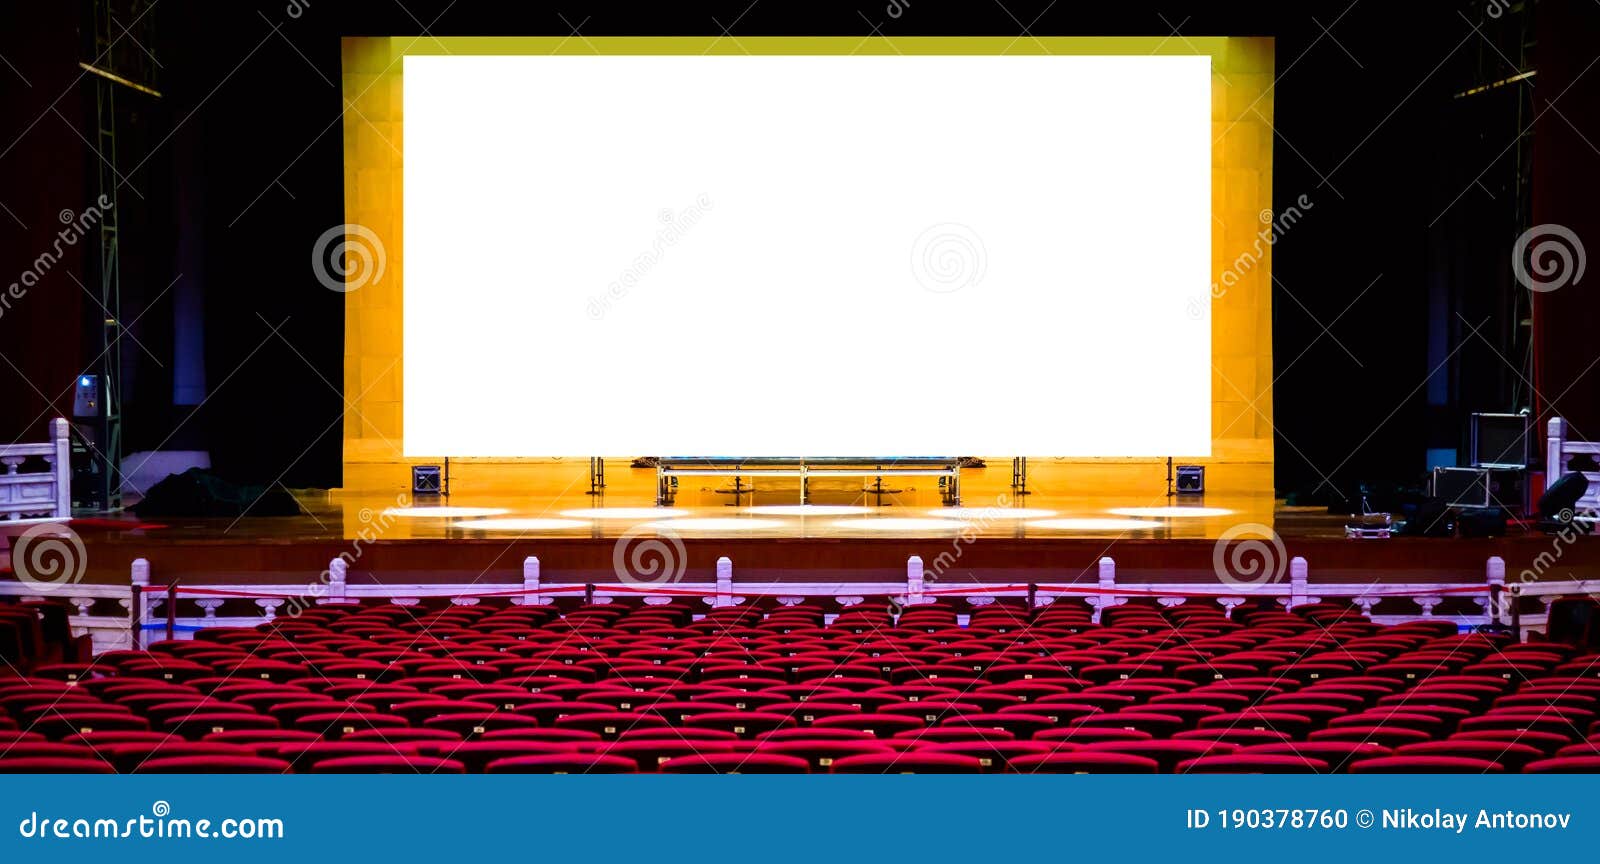 Download Concert Or Performance Hall. Red Seats Armchairs And The ...